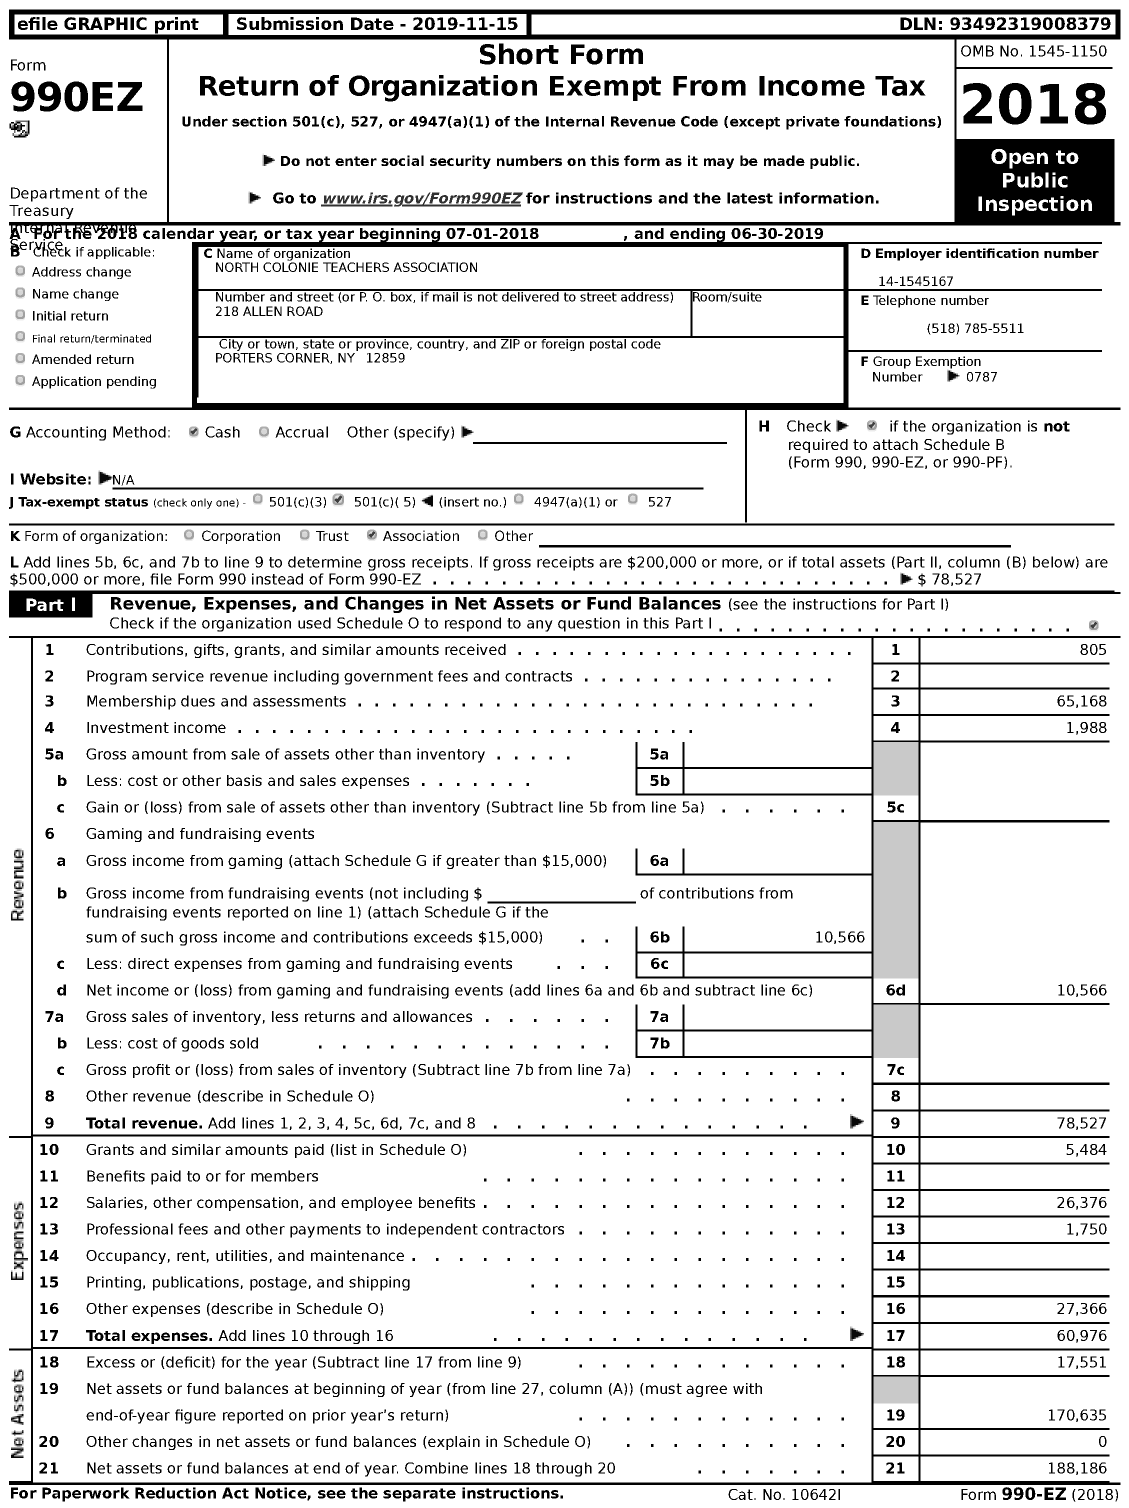 Image of first page of 2018 Form 990EZ for American Federation of Teachers - 2875 North Colonie Teachers Associa